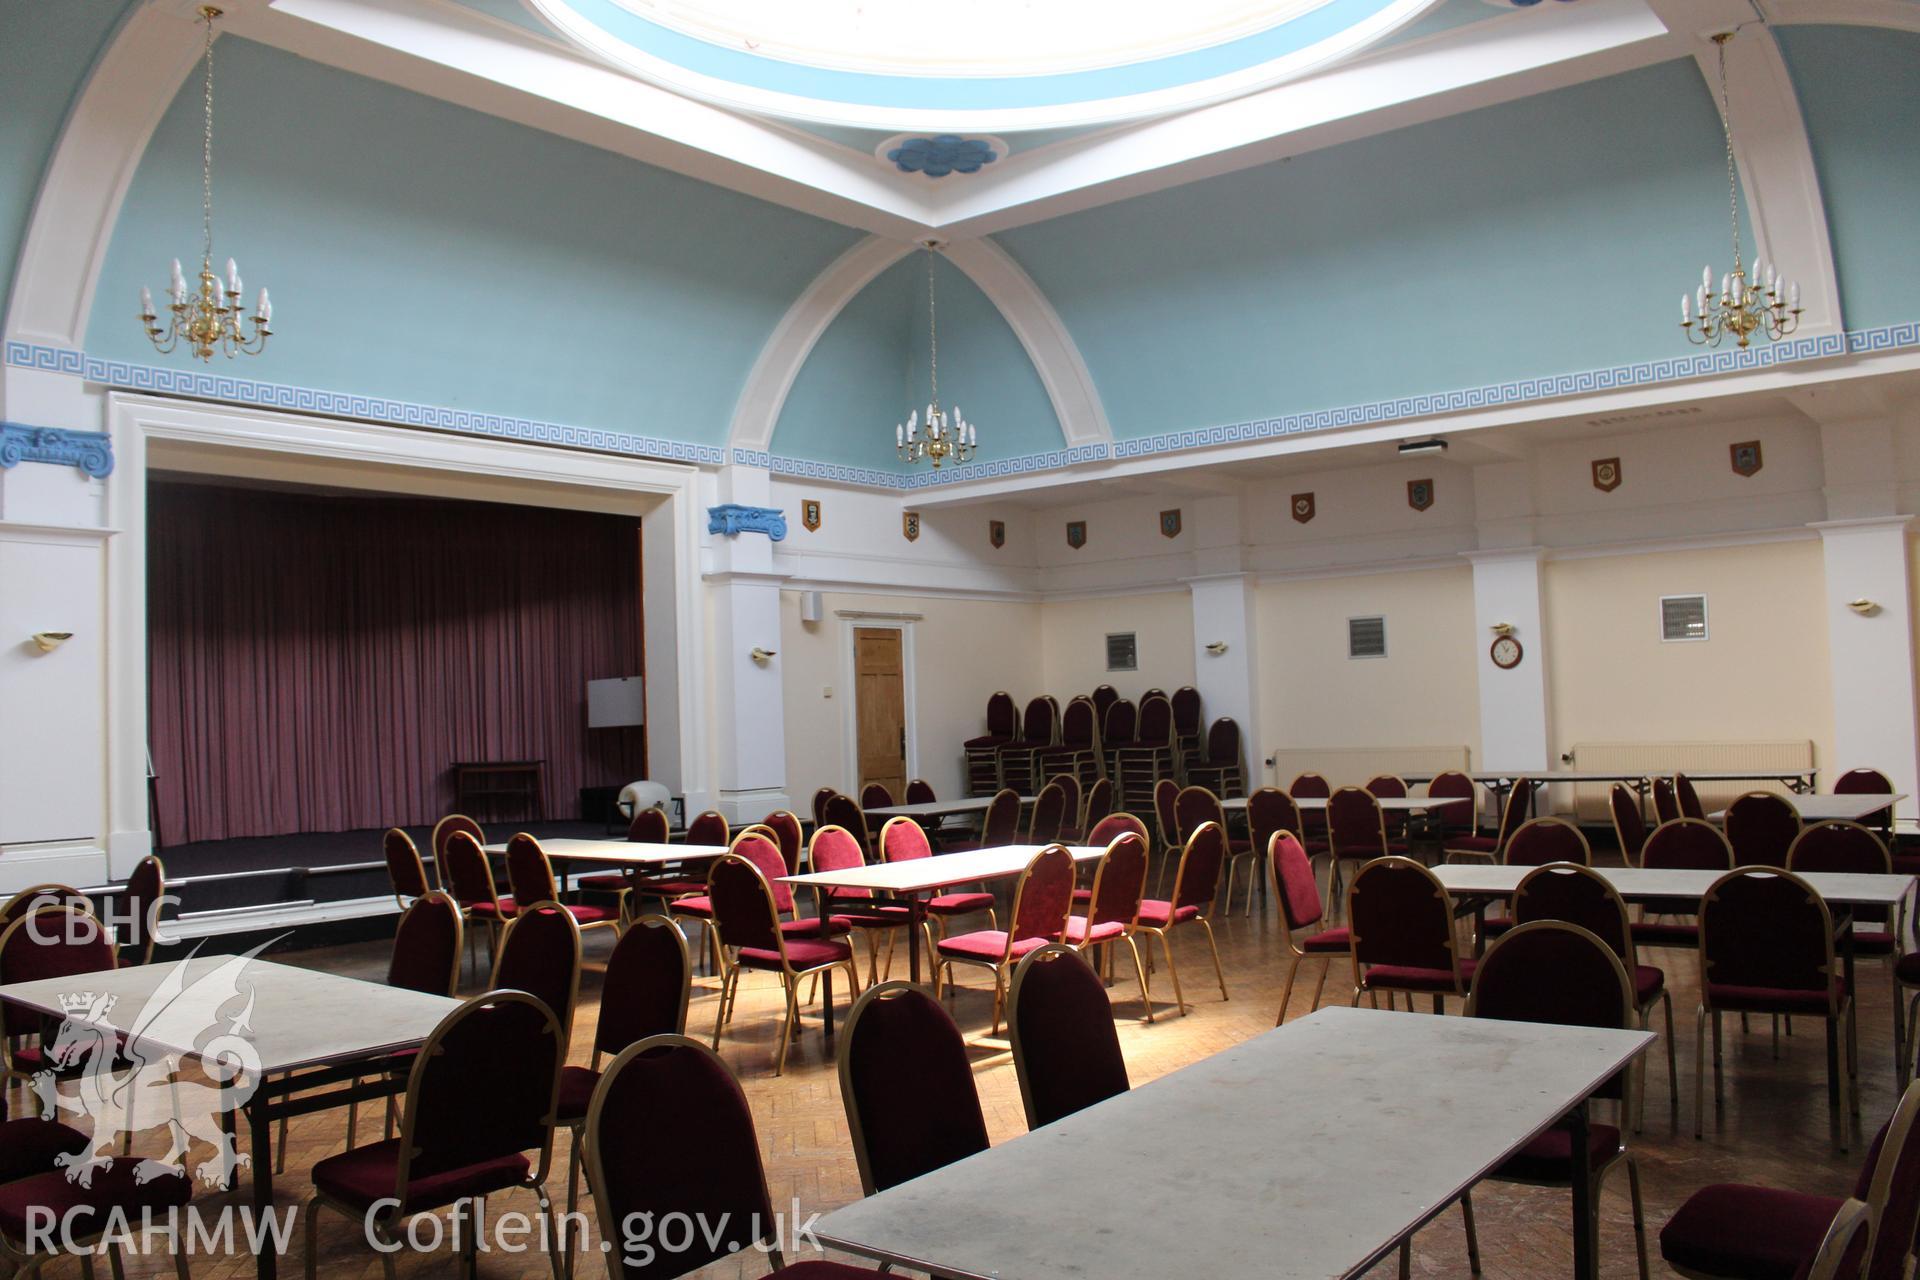 Interior view of former United Free Methodist Church, now a Masonic Temple, in Cardiff. Photograph taken during survey conducted by Sue Fielding of the RCAHMW, 11th March 2019.